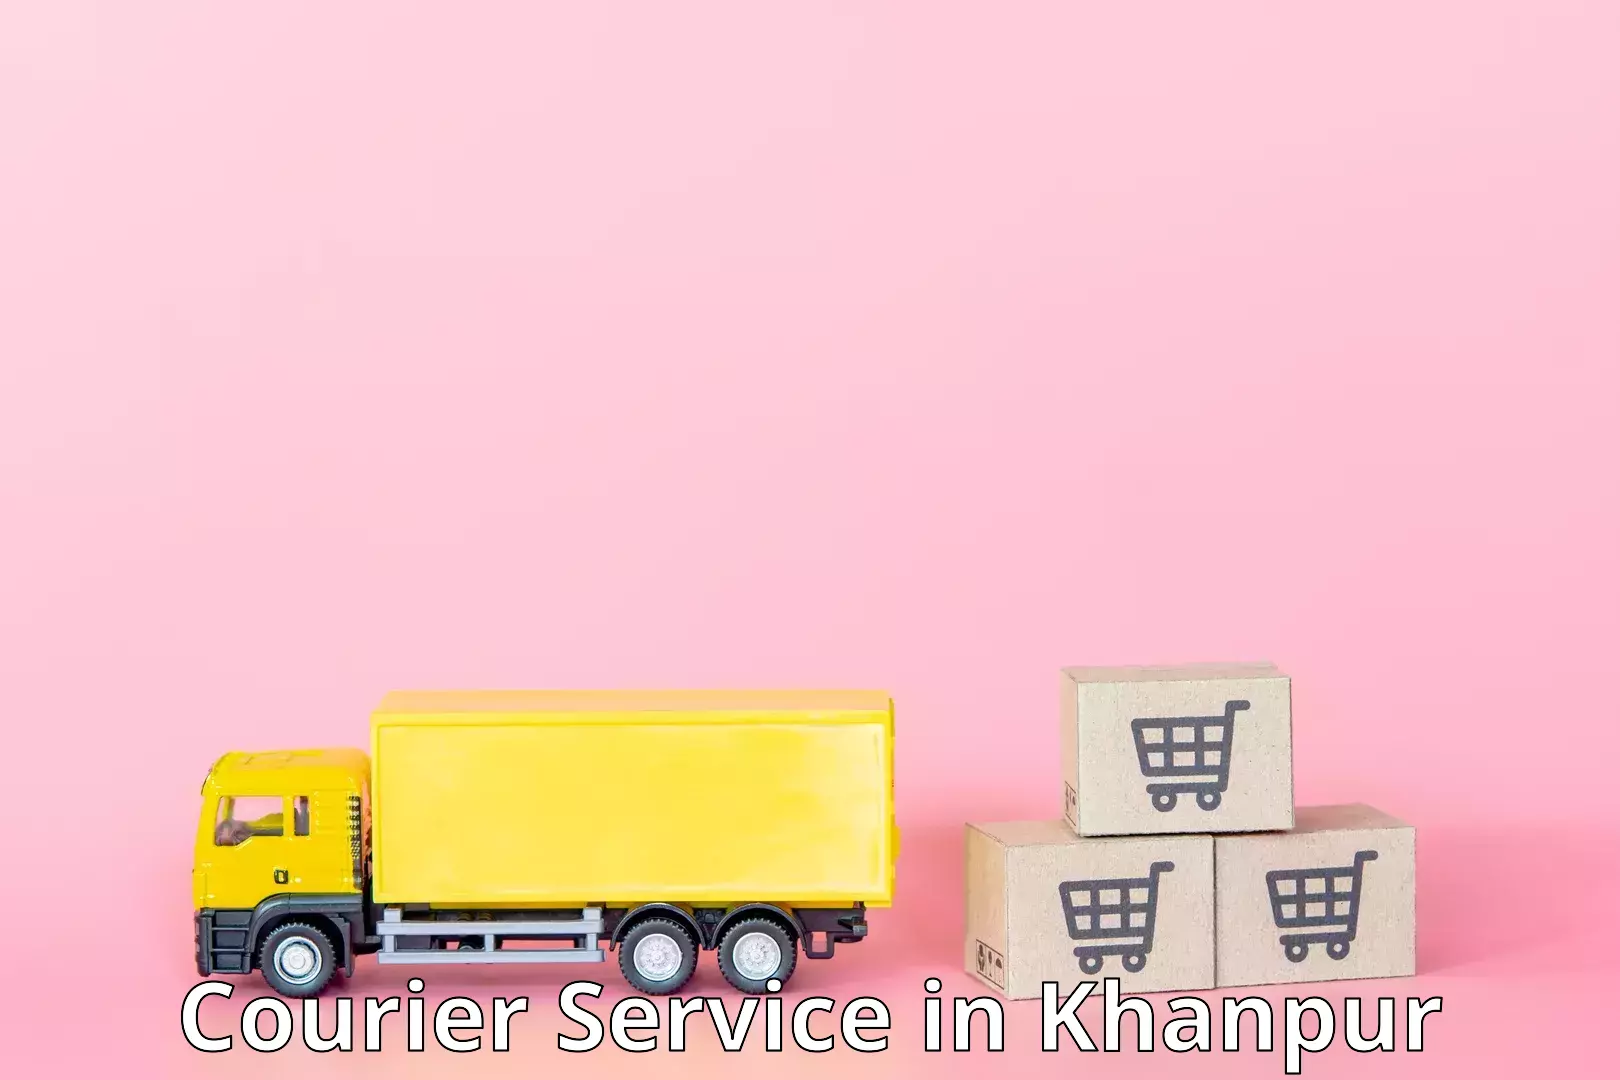 Global freight services in Khanpur